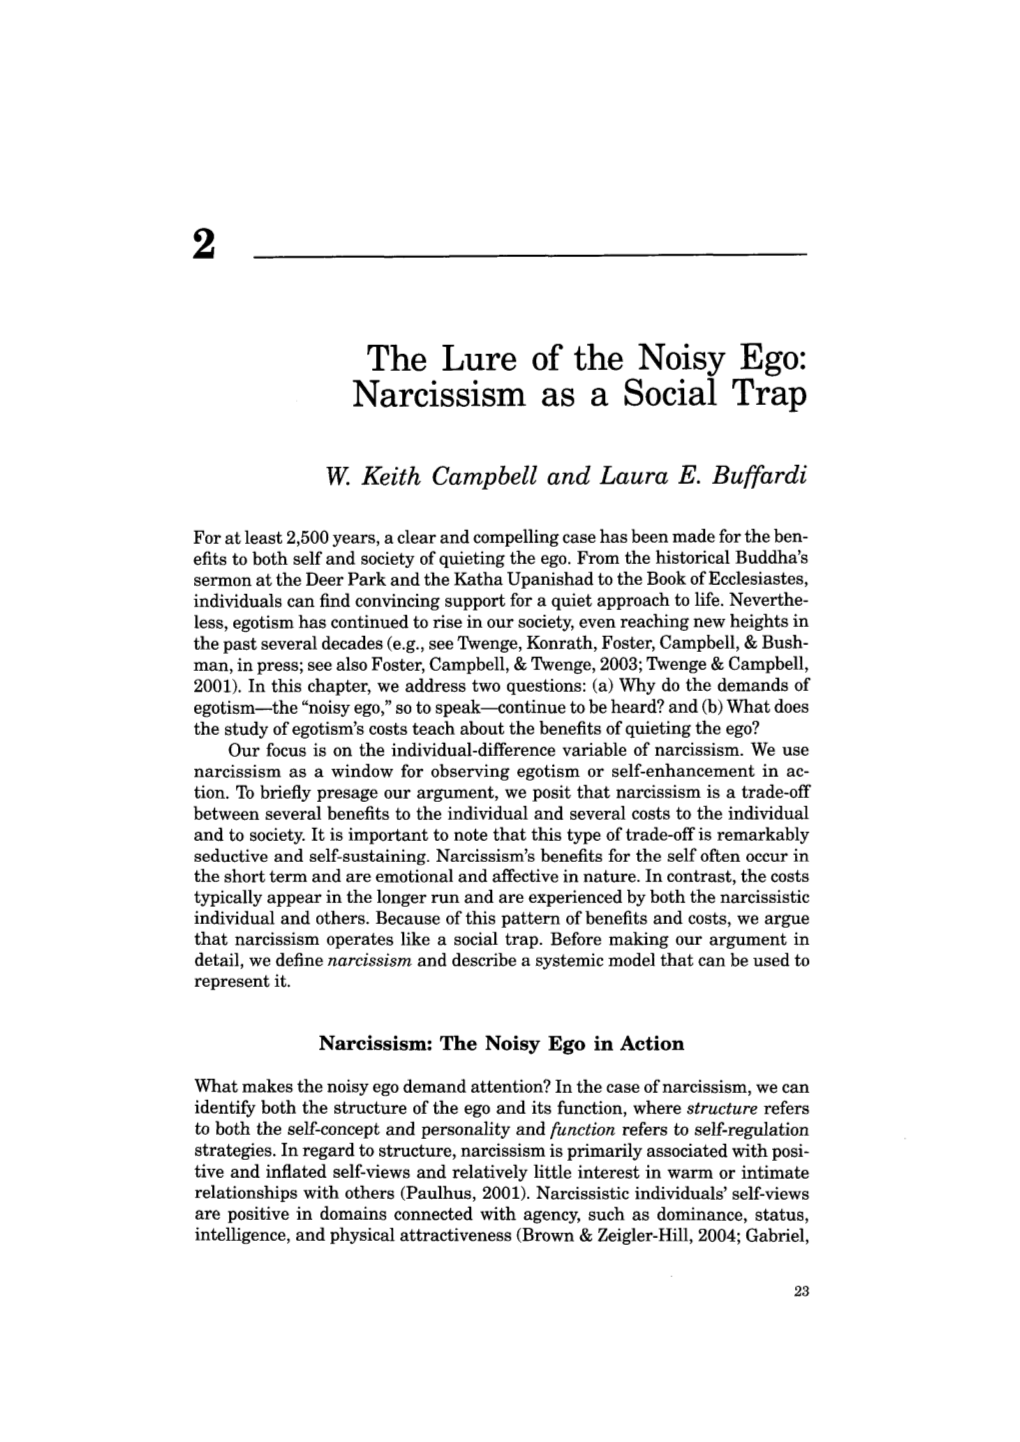 The Lure of the Noisy Ego Narcissism As a Social Trap